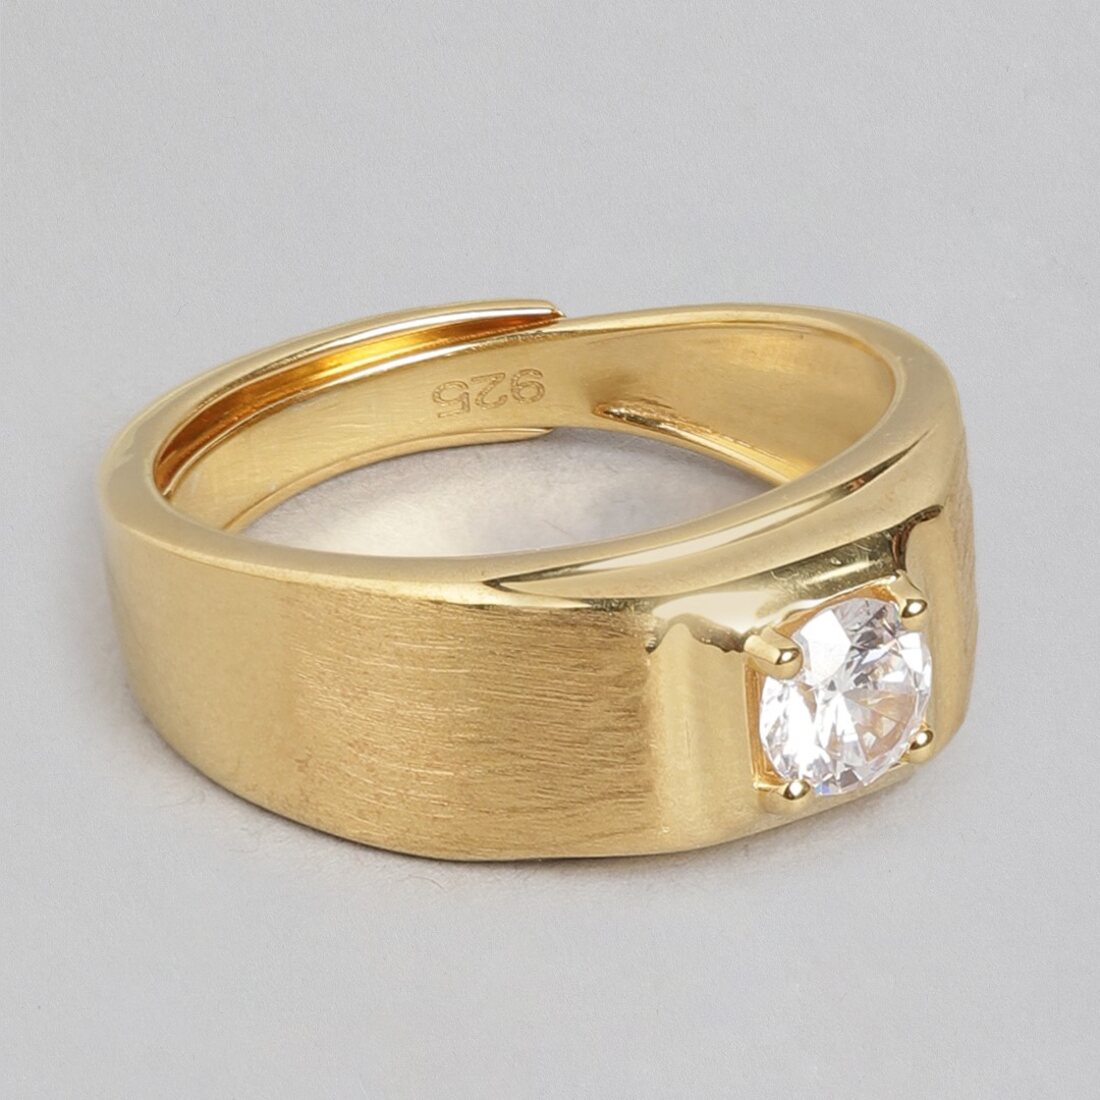 Radiant Gold Glow 925 Sterling Silver Ring with Cubic Zirconia for Him (Adjustable)